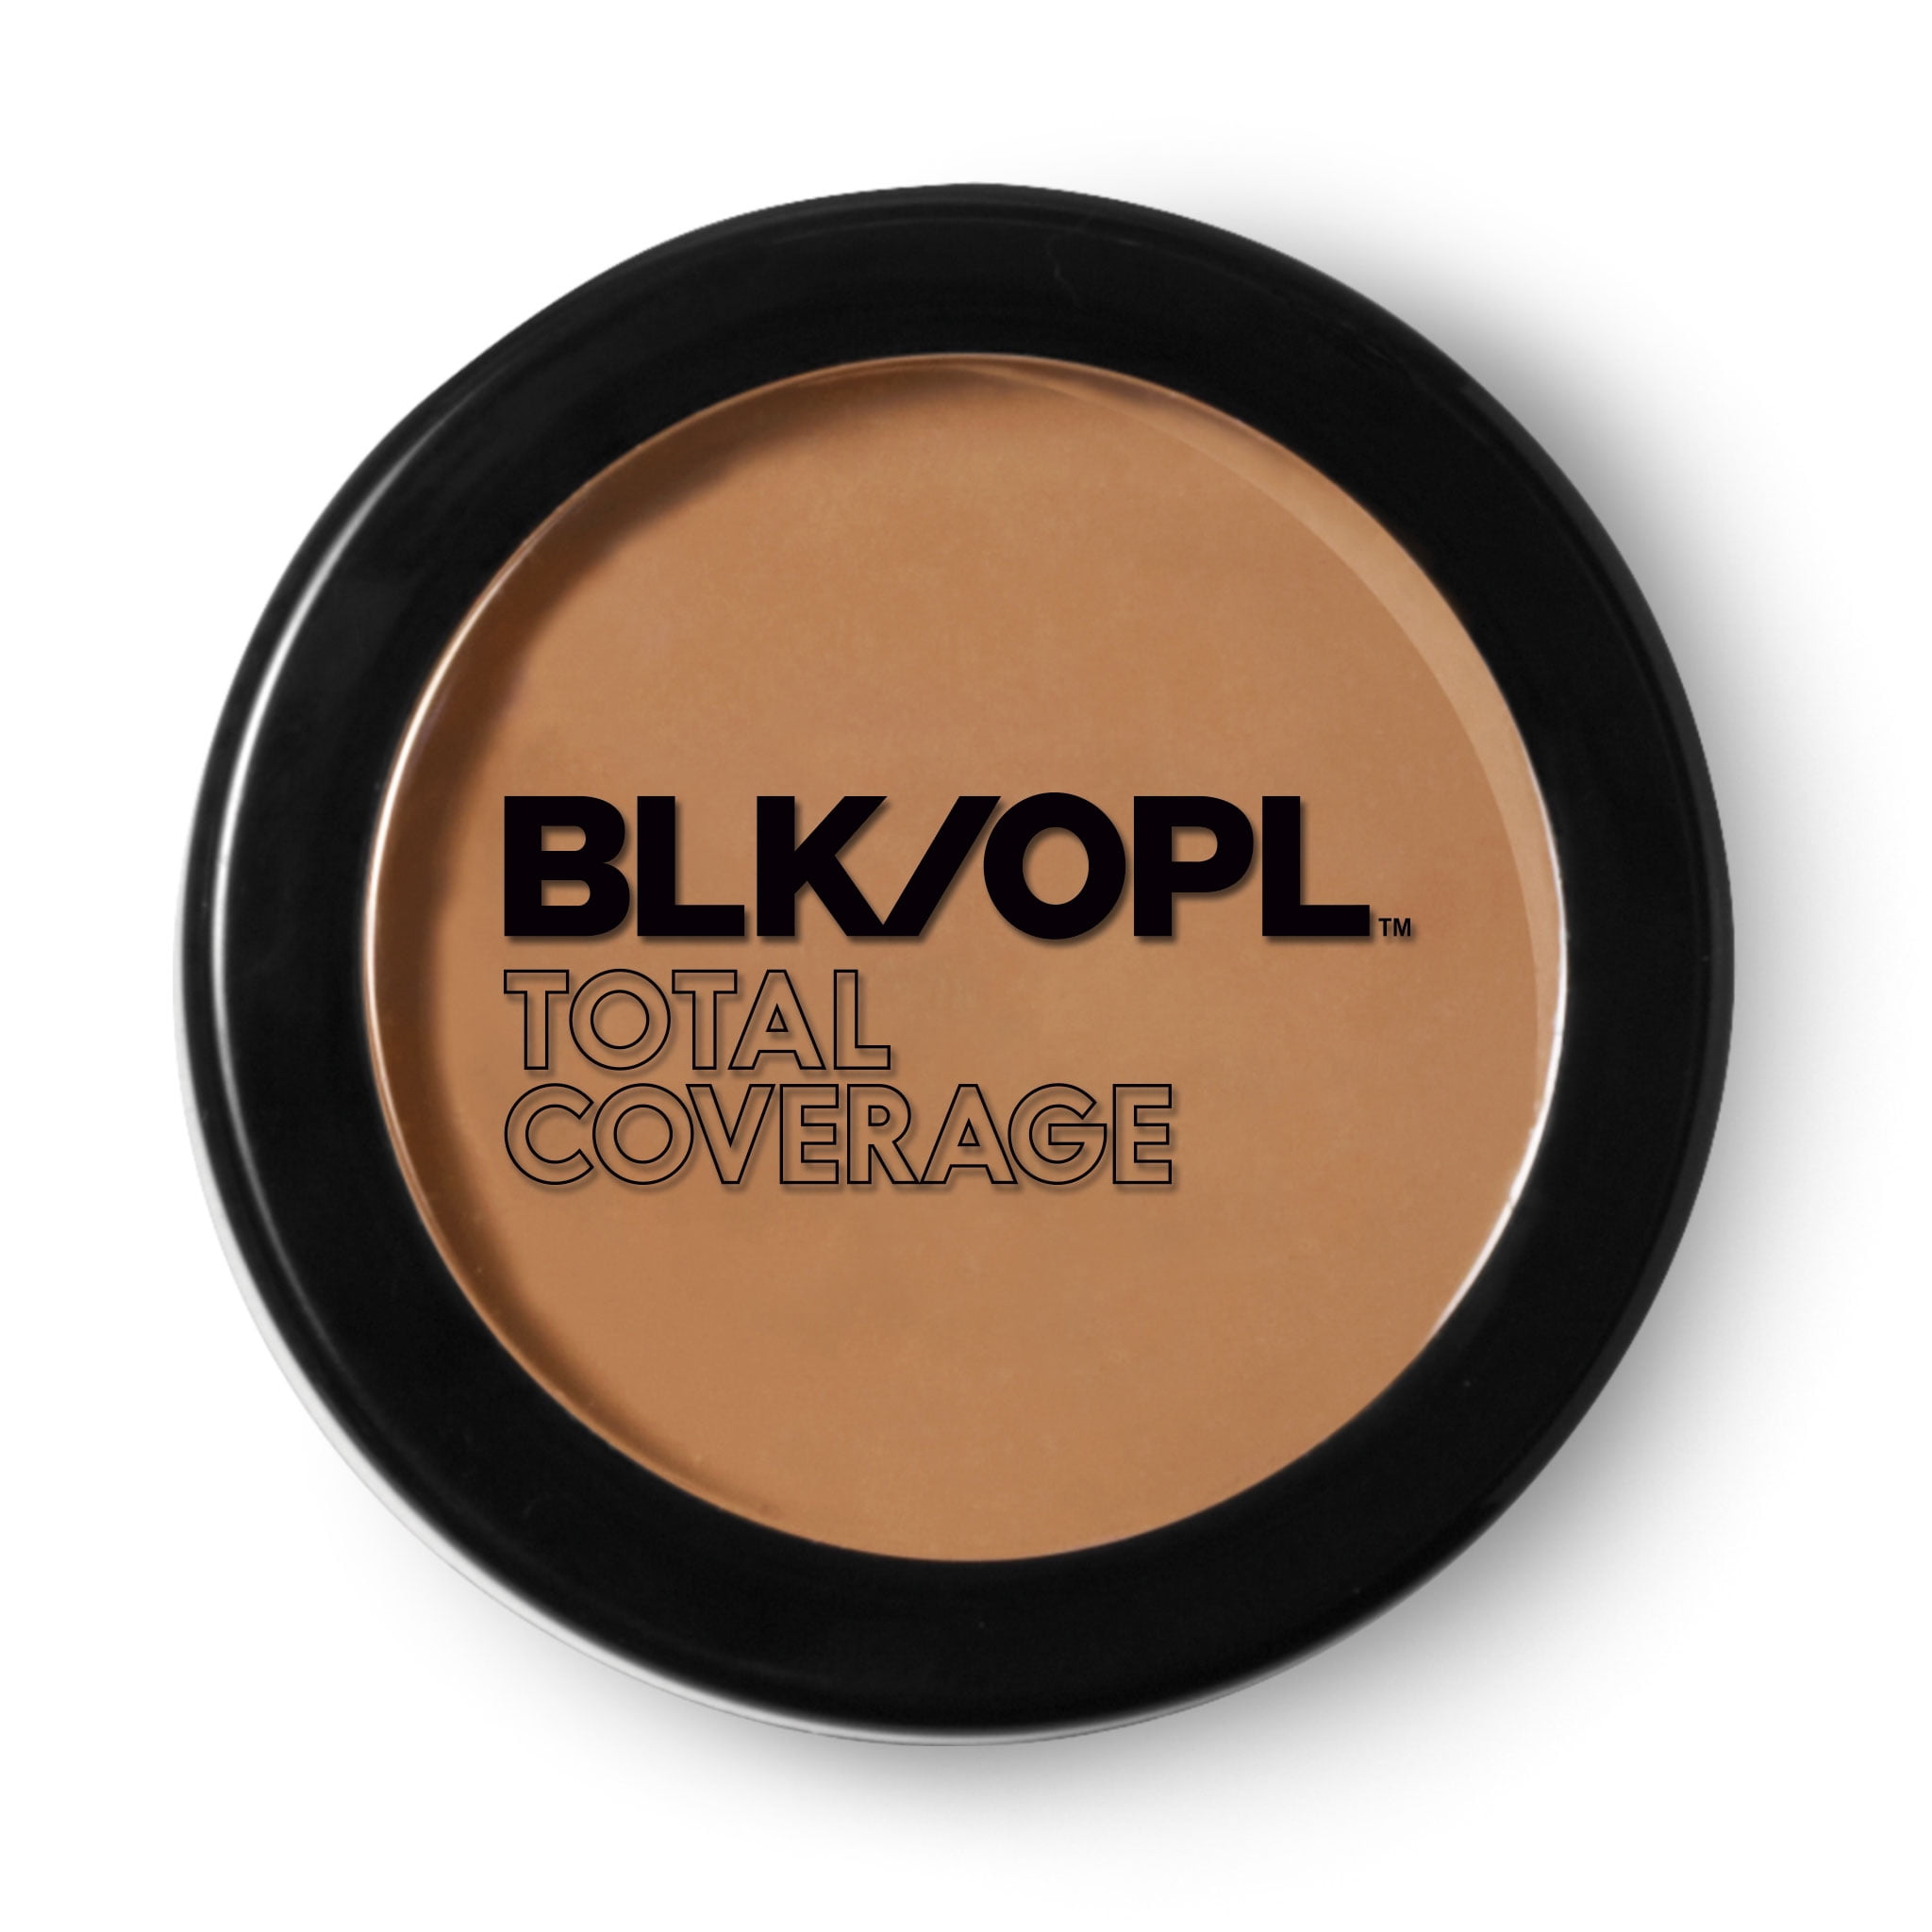 Black Opal Total Coverage Concealing Foundation, Face and Body, Truly Topaz